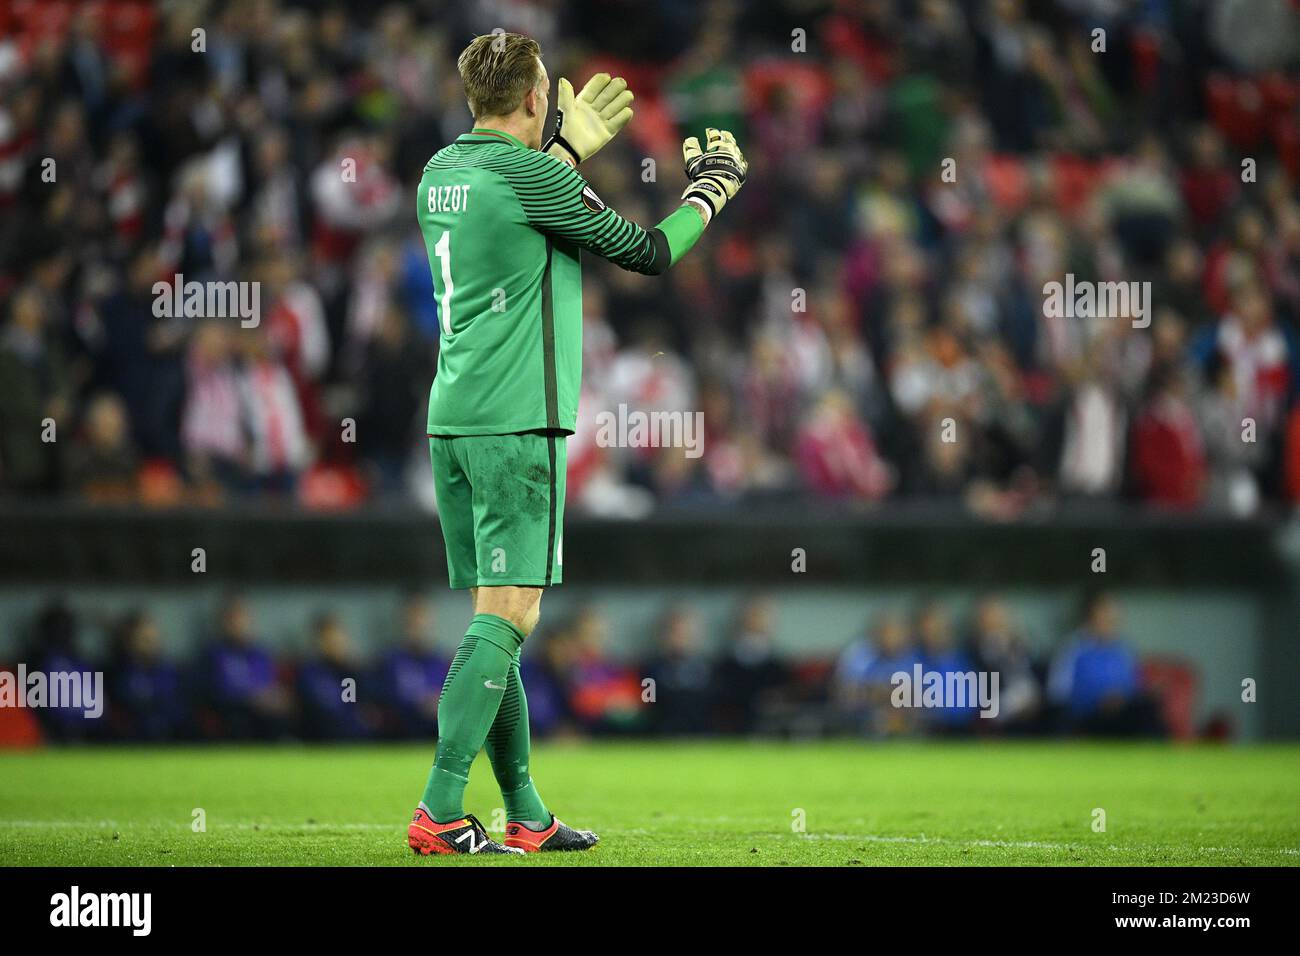 Genk's goalkeeper Marco Bizot pictured during soccer game between Spanish Club Athletic Bilbao and Belgian team KRC Genk in Bilbao, Spain, Thursday 03 November 2016, the fourth game of the group stage of the Europa League competition in Group F. BELGA PHOTO YORICK JANSENS Stock Photo